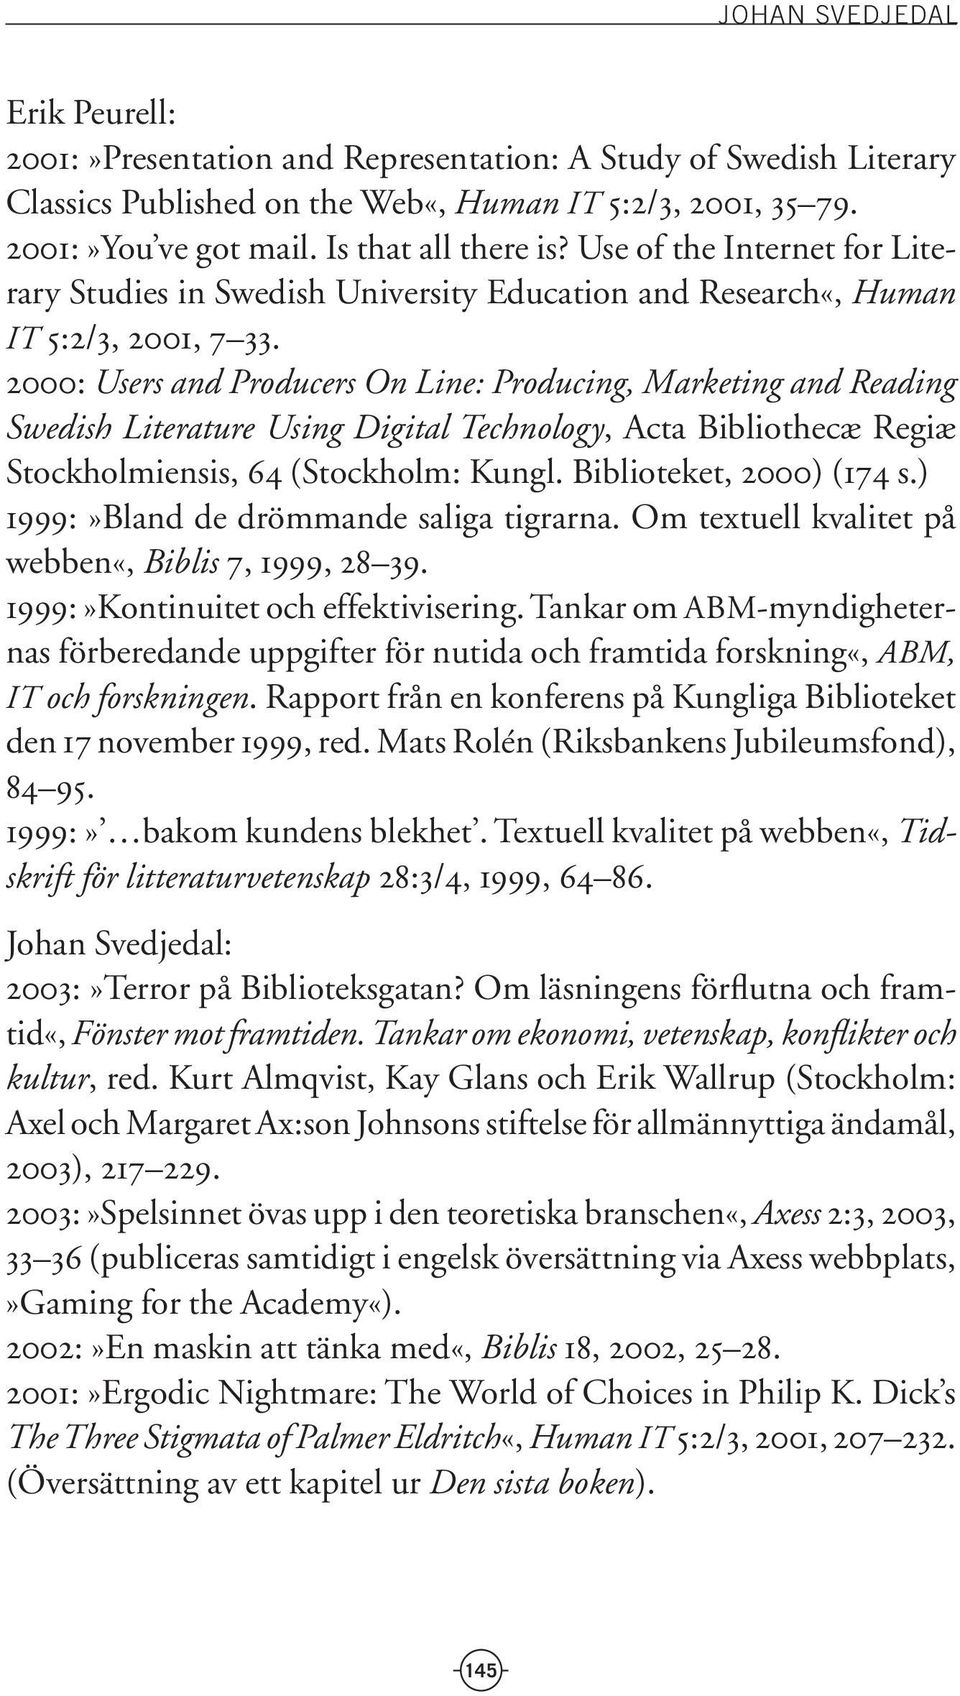 2000: Users and Producers On Line: Producing, Marketing and Reading Swedish Literature Using Digital Technology, Acta Bibliothecæ Regiæ Stockholmiensis, 64 (Stockholm: Kungl.